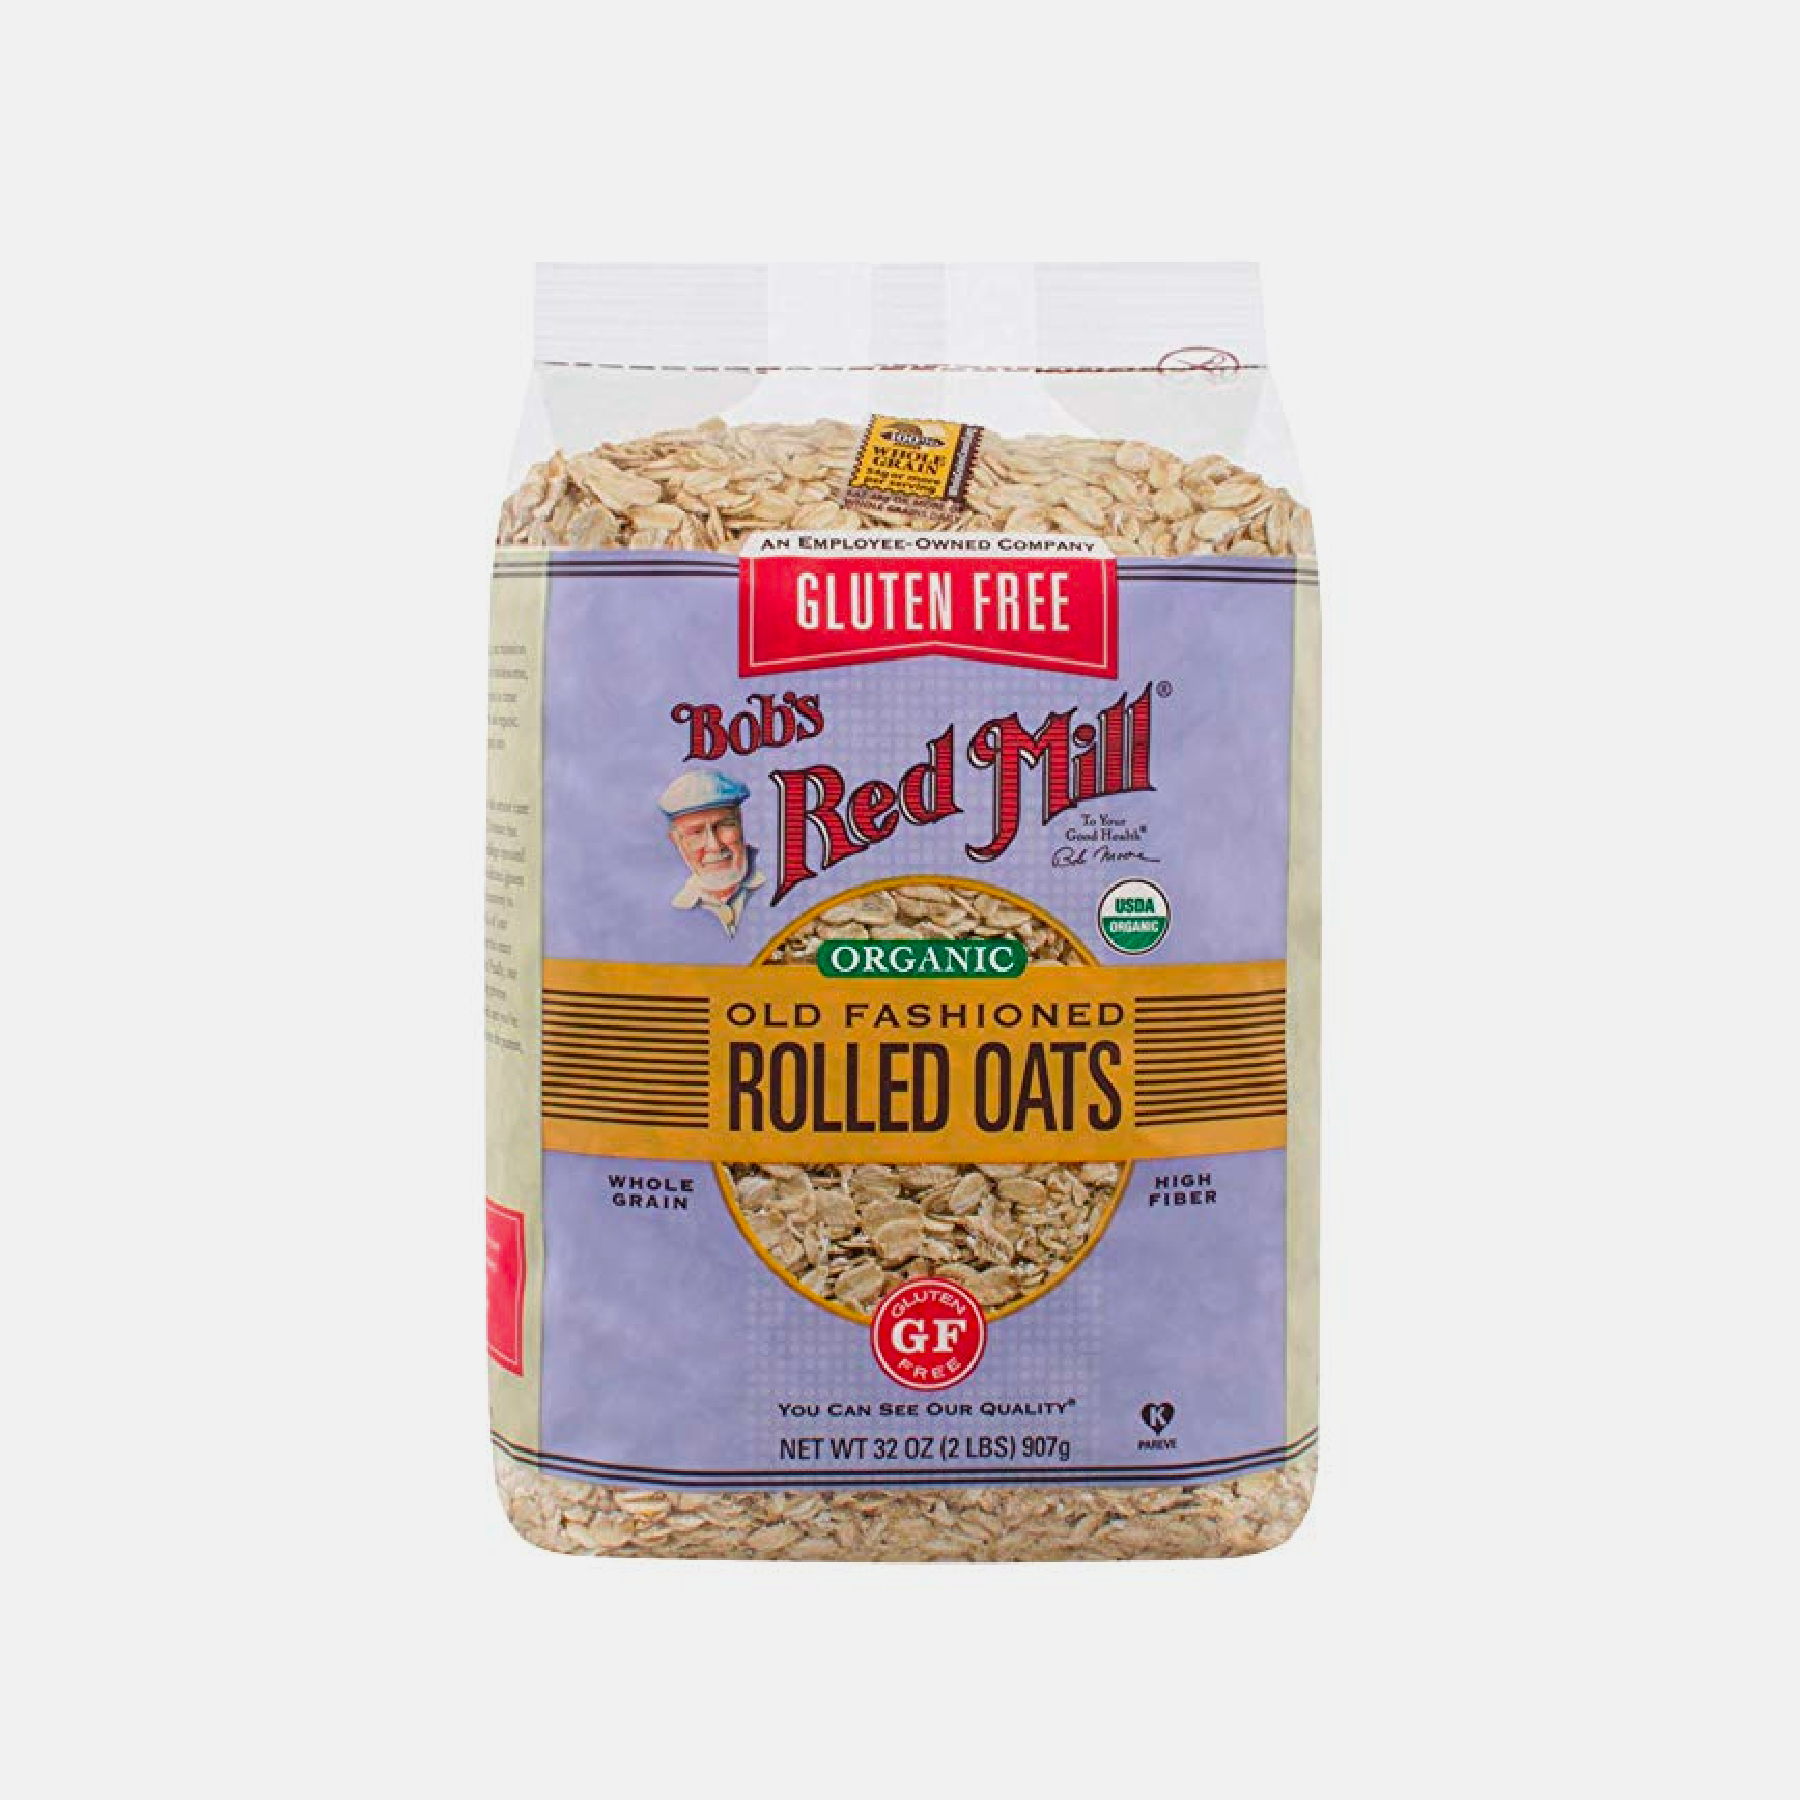 ALL-SORTS-OF-GLUTEN-FREE-ROLLED-OATS